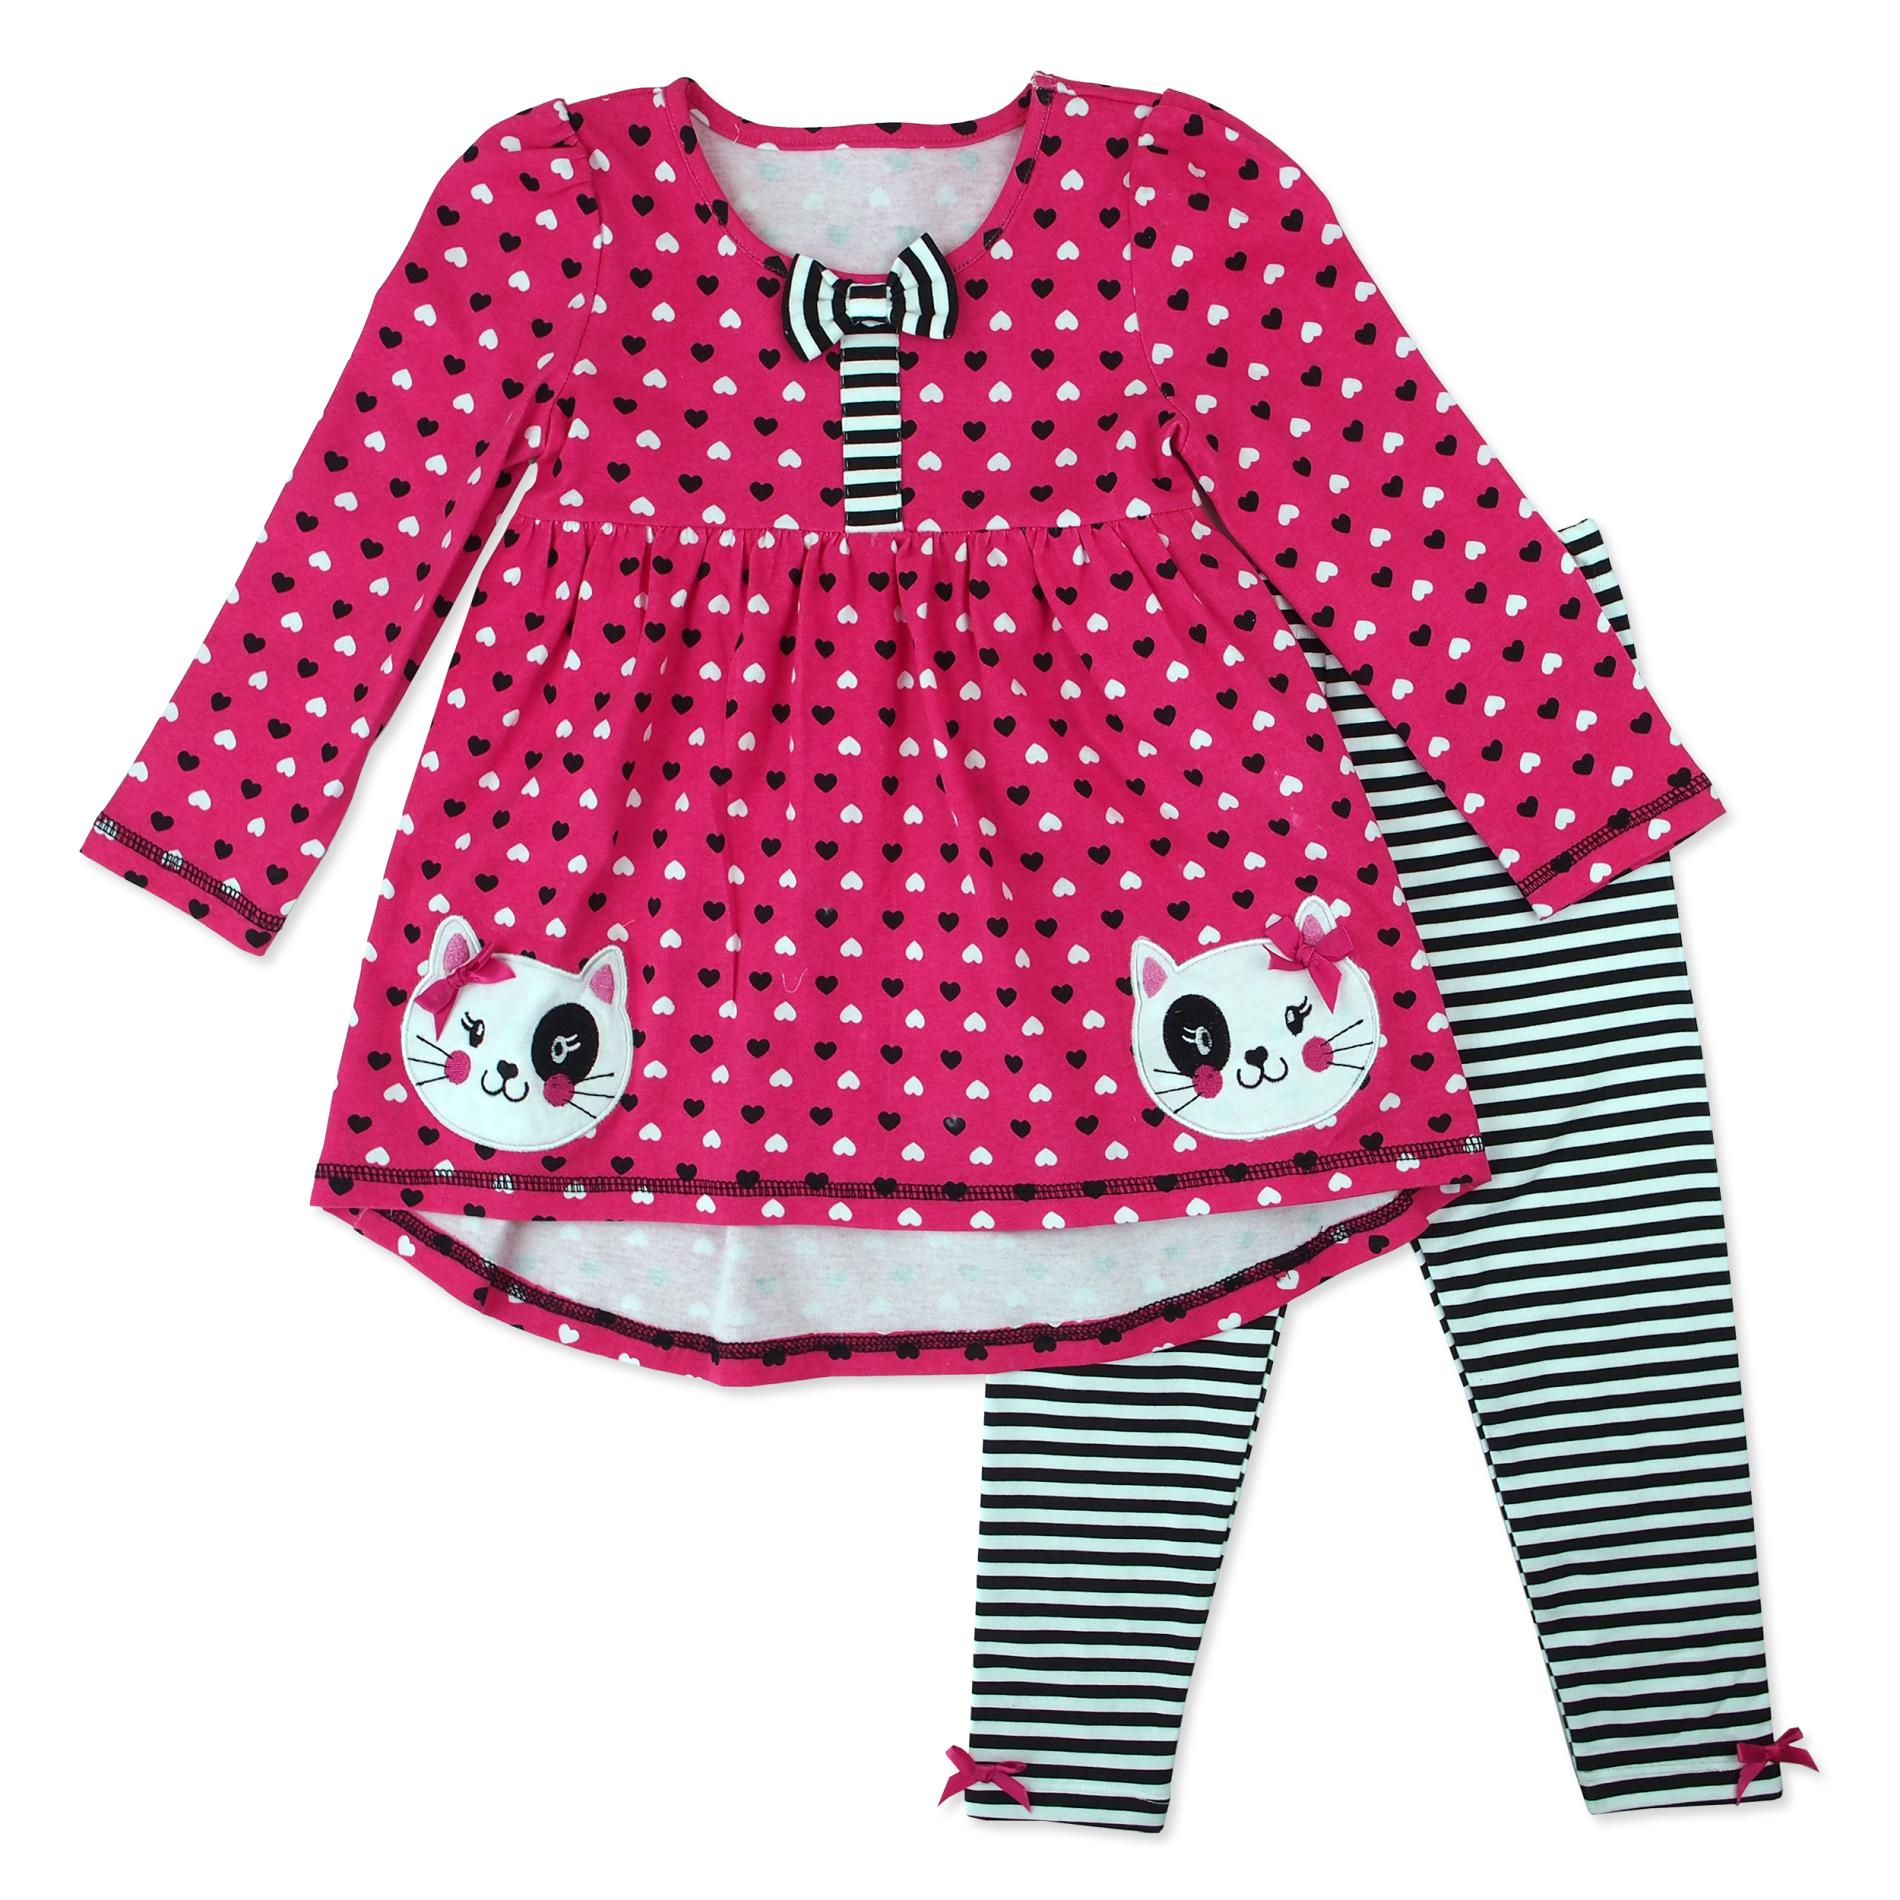 Young Hearts Infant & Toddler Girl's Top & Leggings - Hearts & Striped